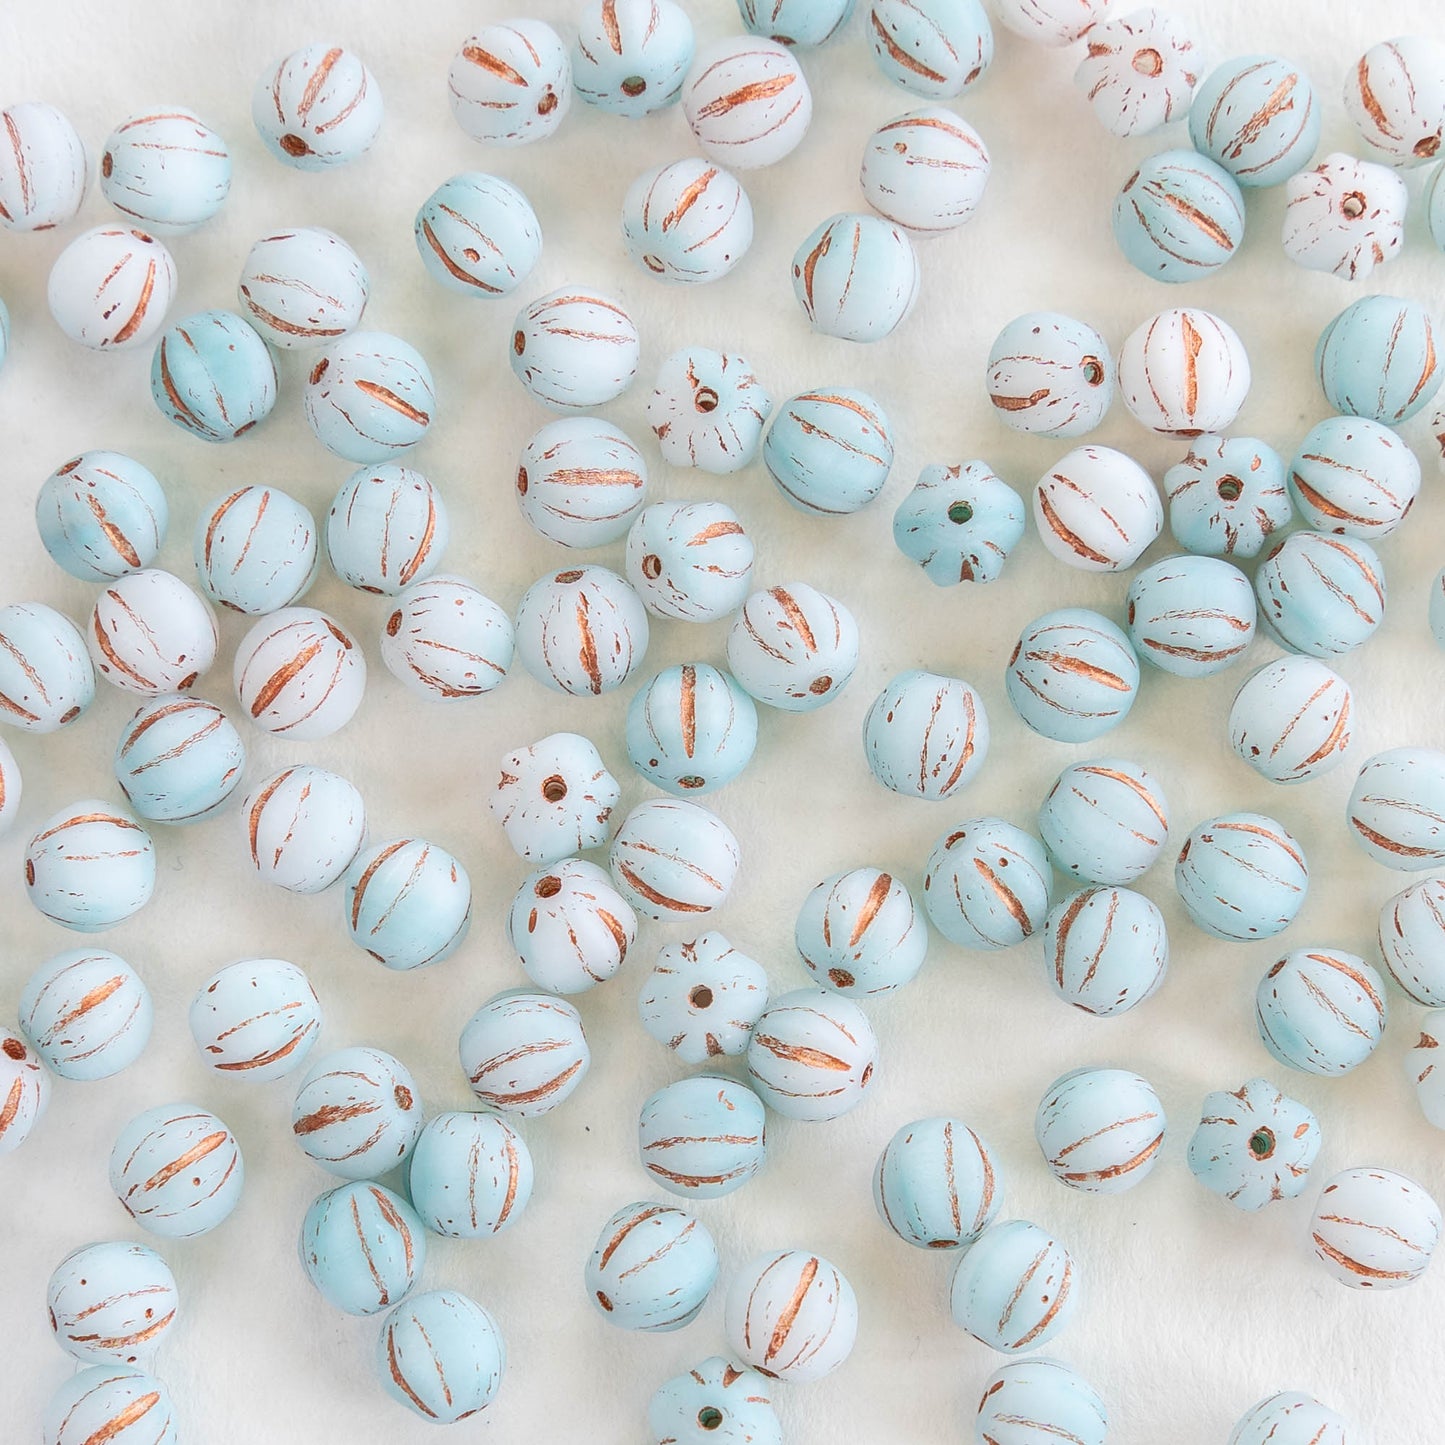 6mm Glass Beads - Matte Aqua & White with Copper Wash -  50 or 100